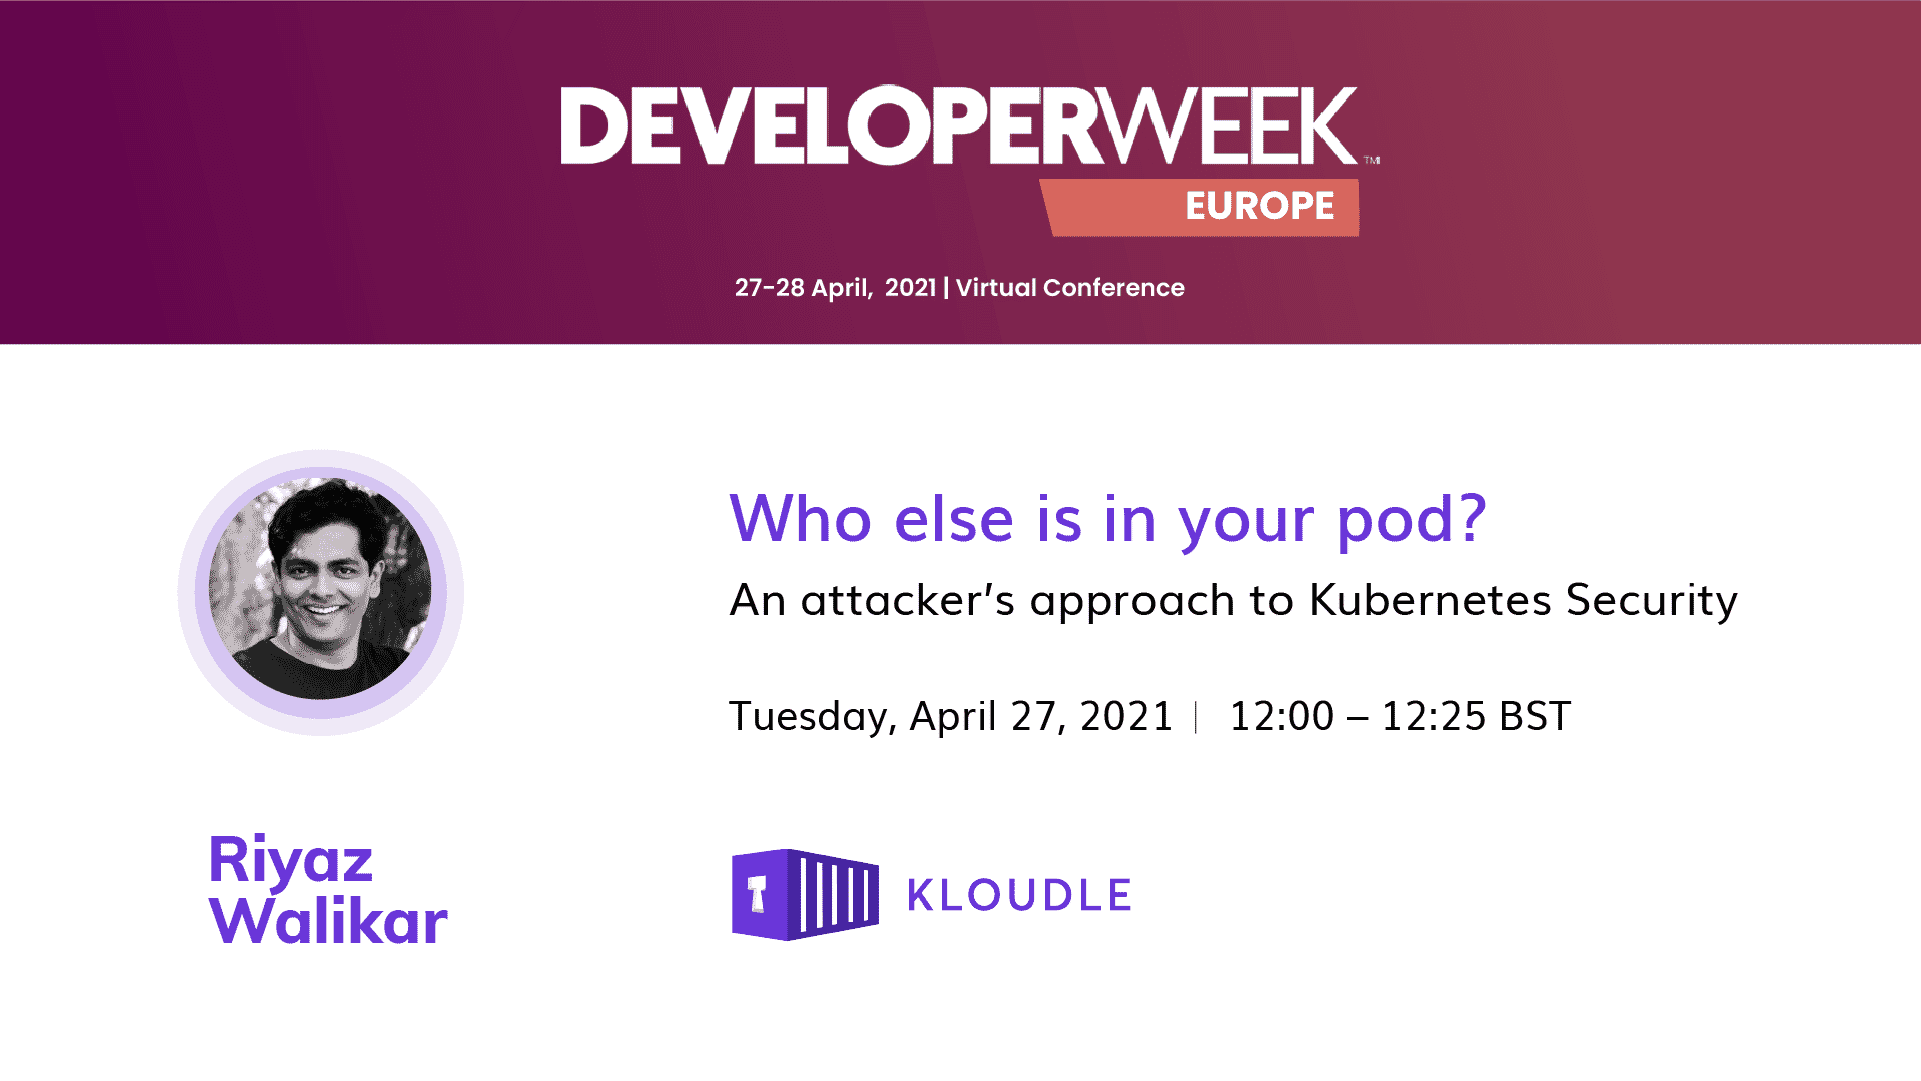 DeveloperWeek Europe 2021 - Walkthrough of the Talk slides and Audience Questions